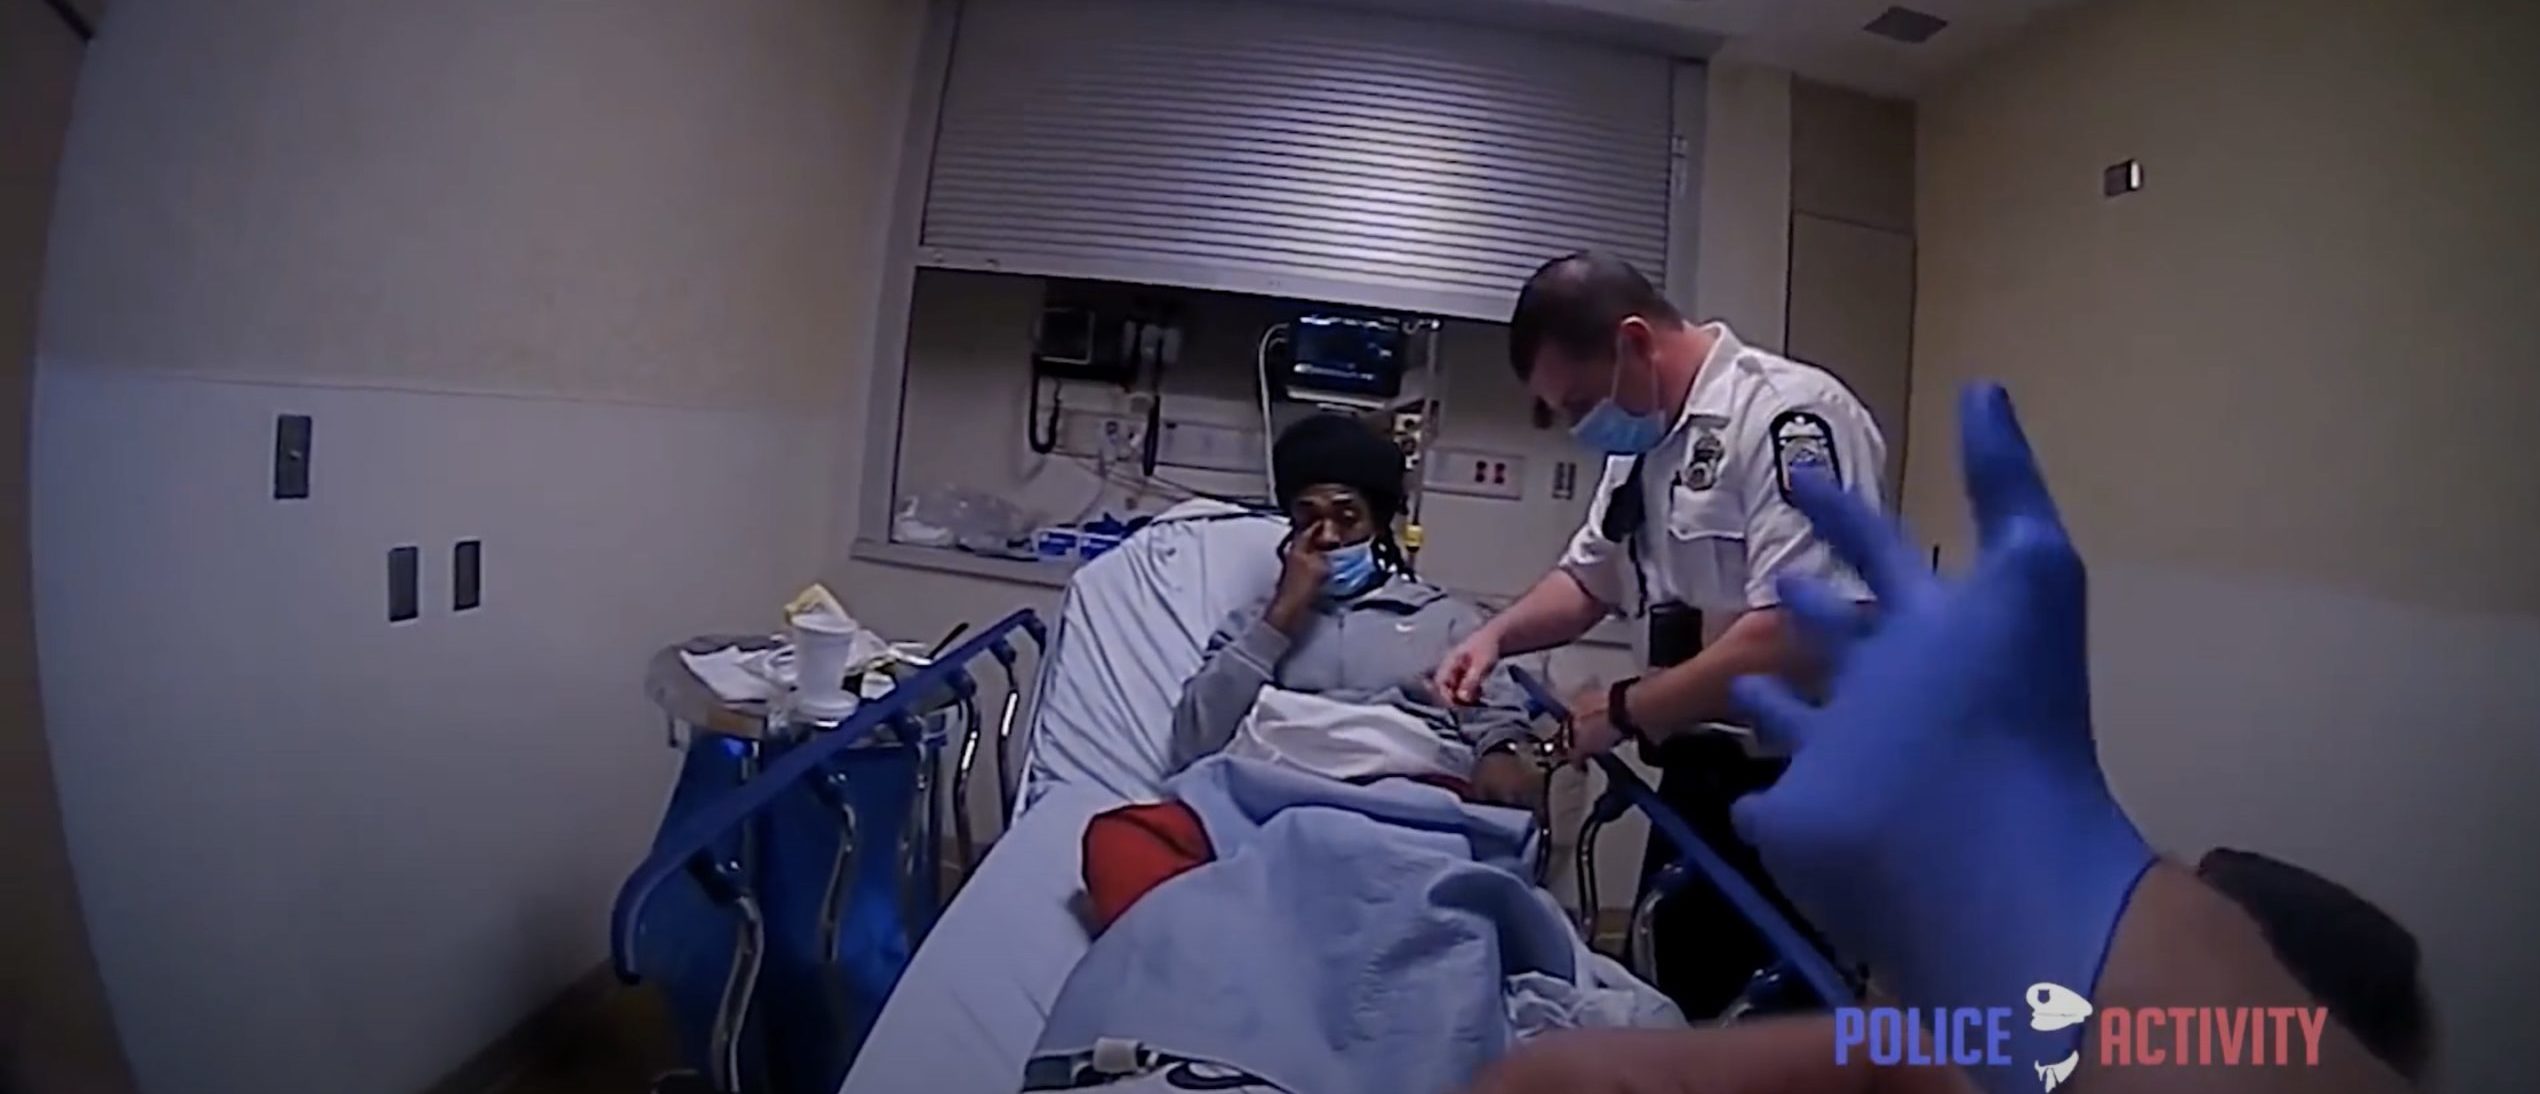 Bodycam Footage Captures Moment Man Is Fatally Shot In Hospital After Scuffle With Police The 